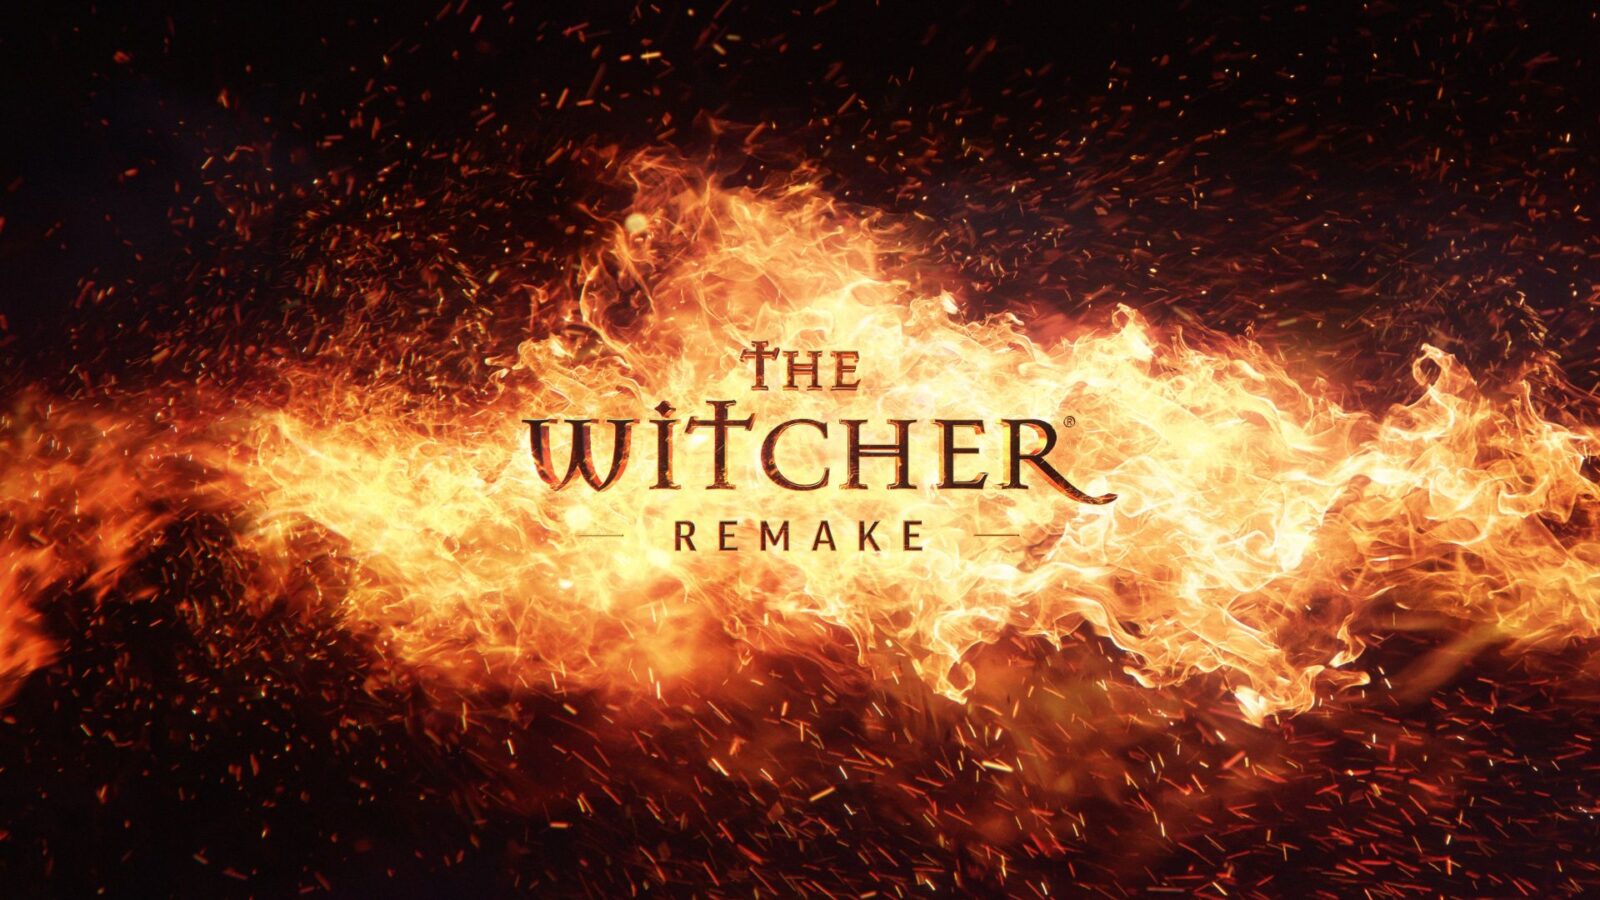 The Witcher Remake | The Witcher | CD Projekt Red ประกาศสร้าง The Witcher Remake ด้วย Unreal Engine 5